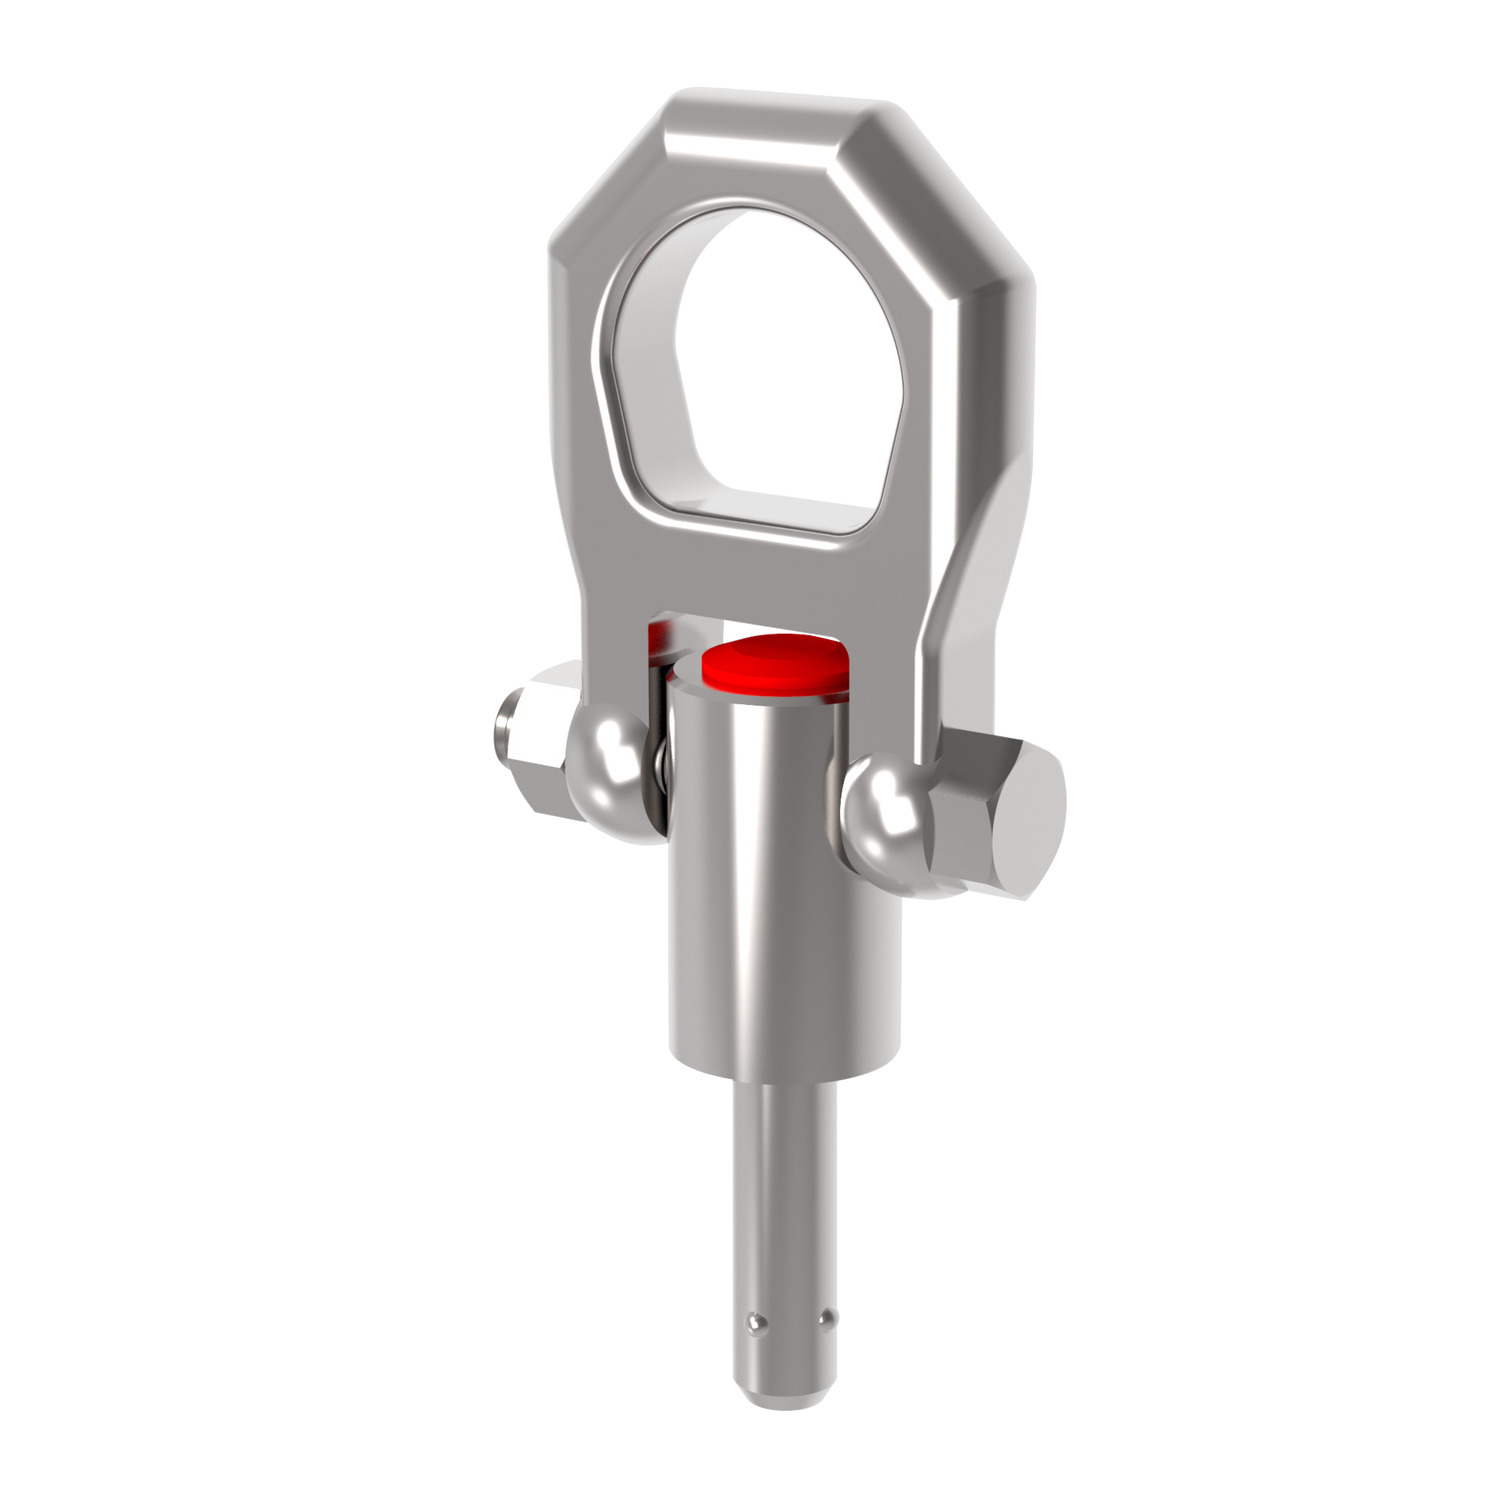 Quick Lift Pins - Self Locking Quick release lifting pins. Stainless steel.